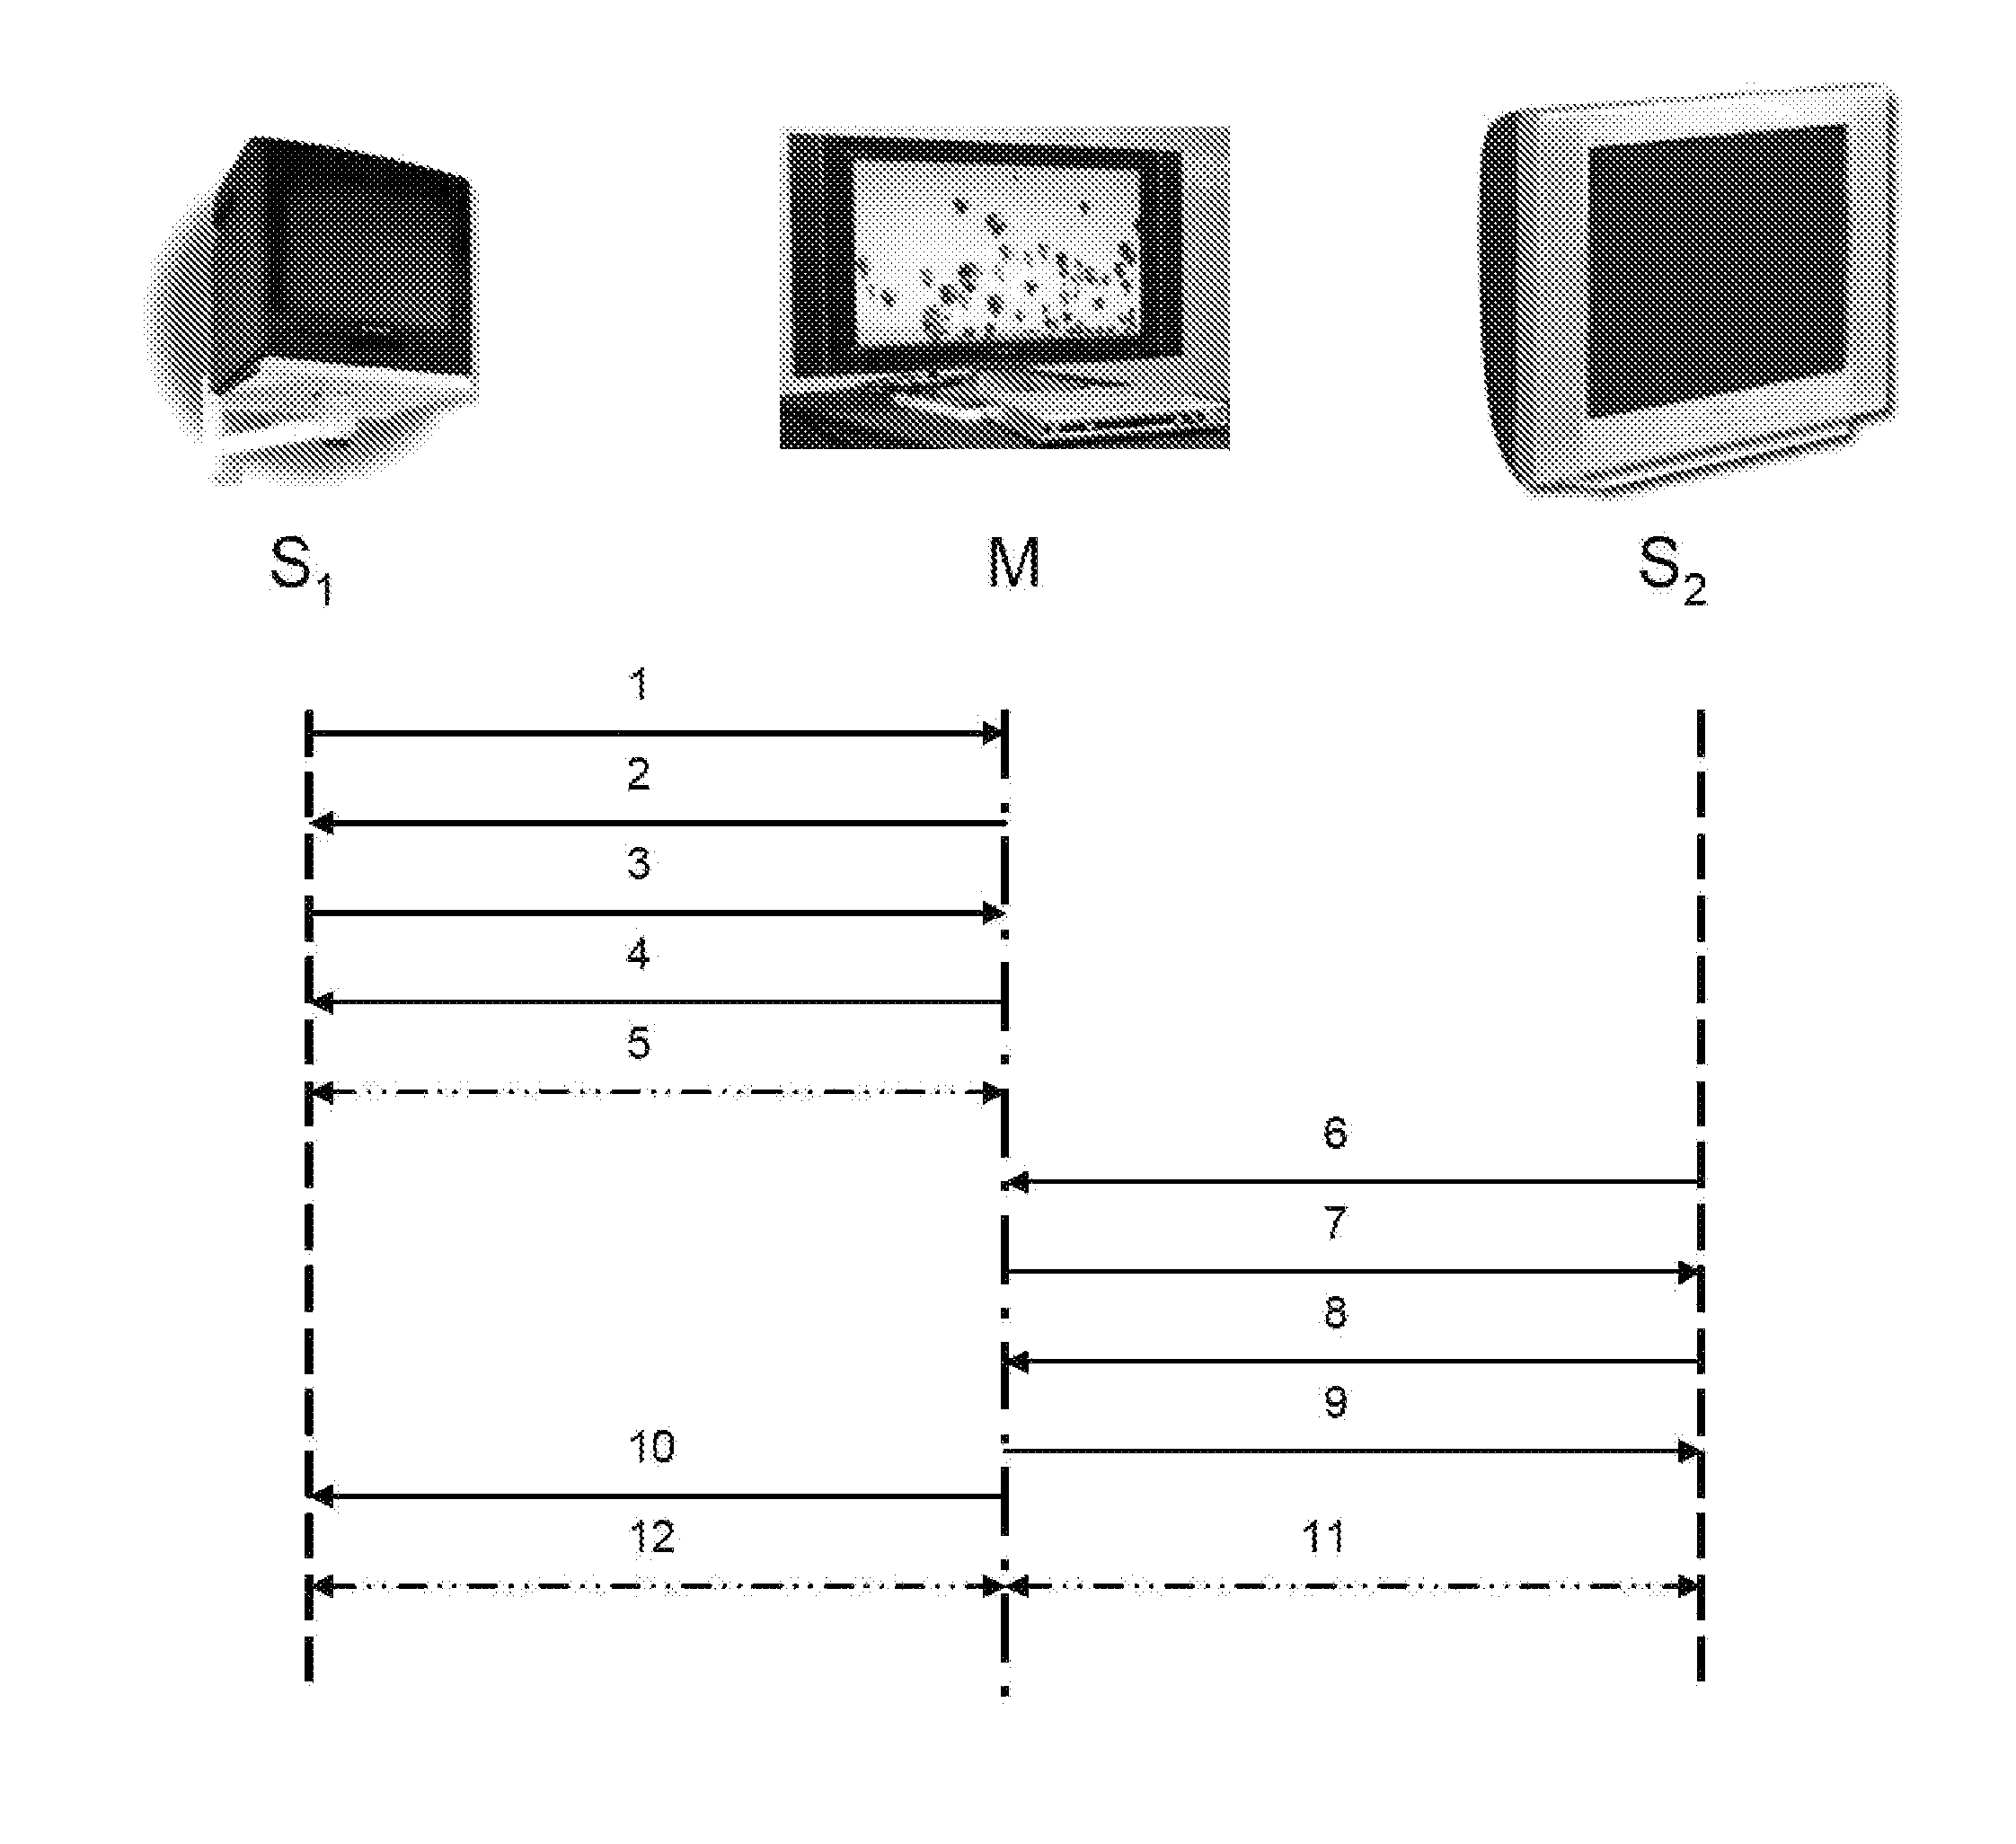 Apparatus, method and system for synchronizing a common broadcast signal among multiple television units